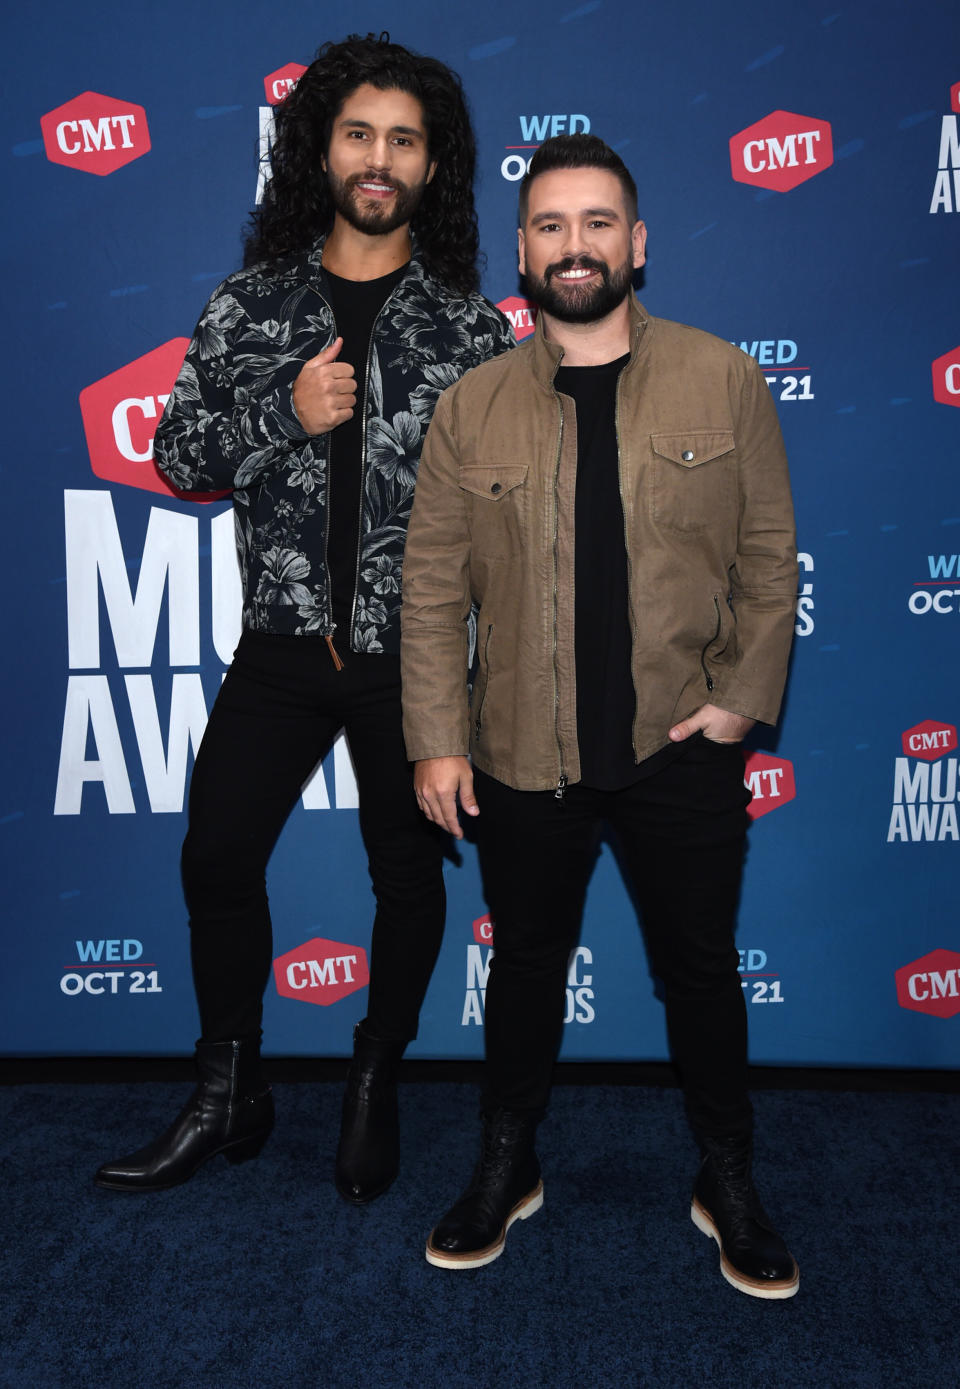 (Photo: John Shearer/CMT2020/Getty Images for CMT)